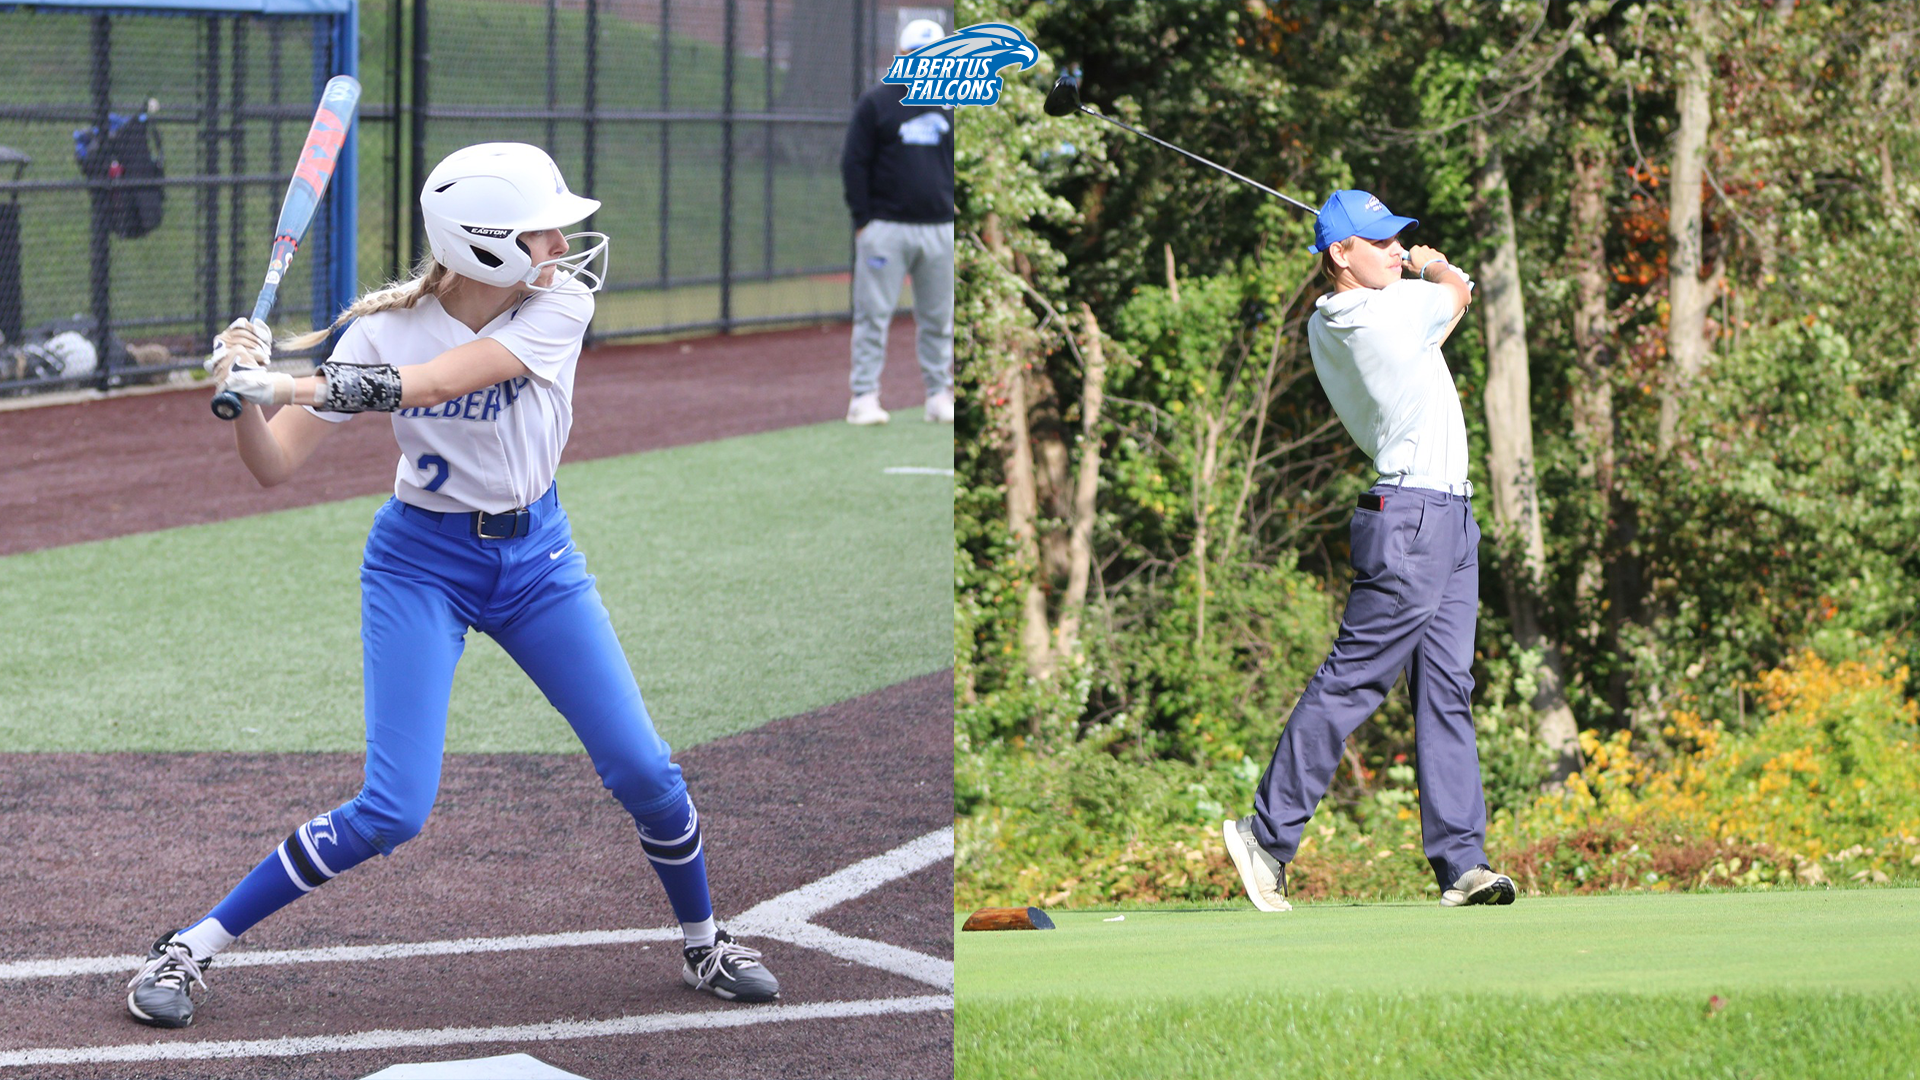 Kristofak and Smith Honored as Falcons of the Week